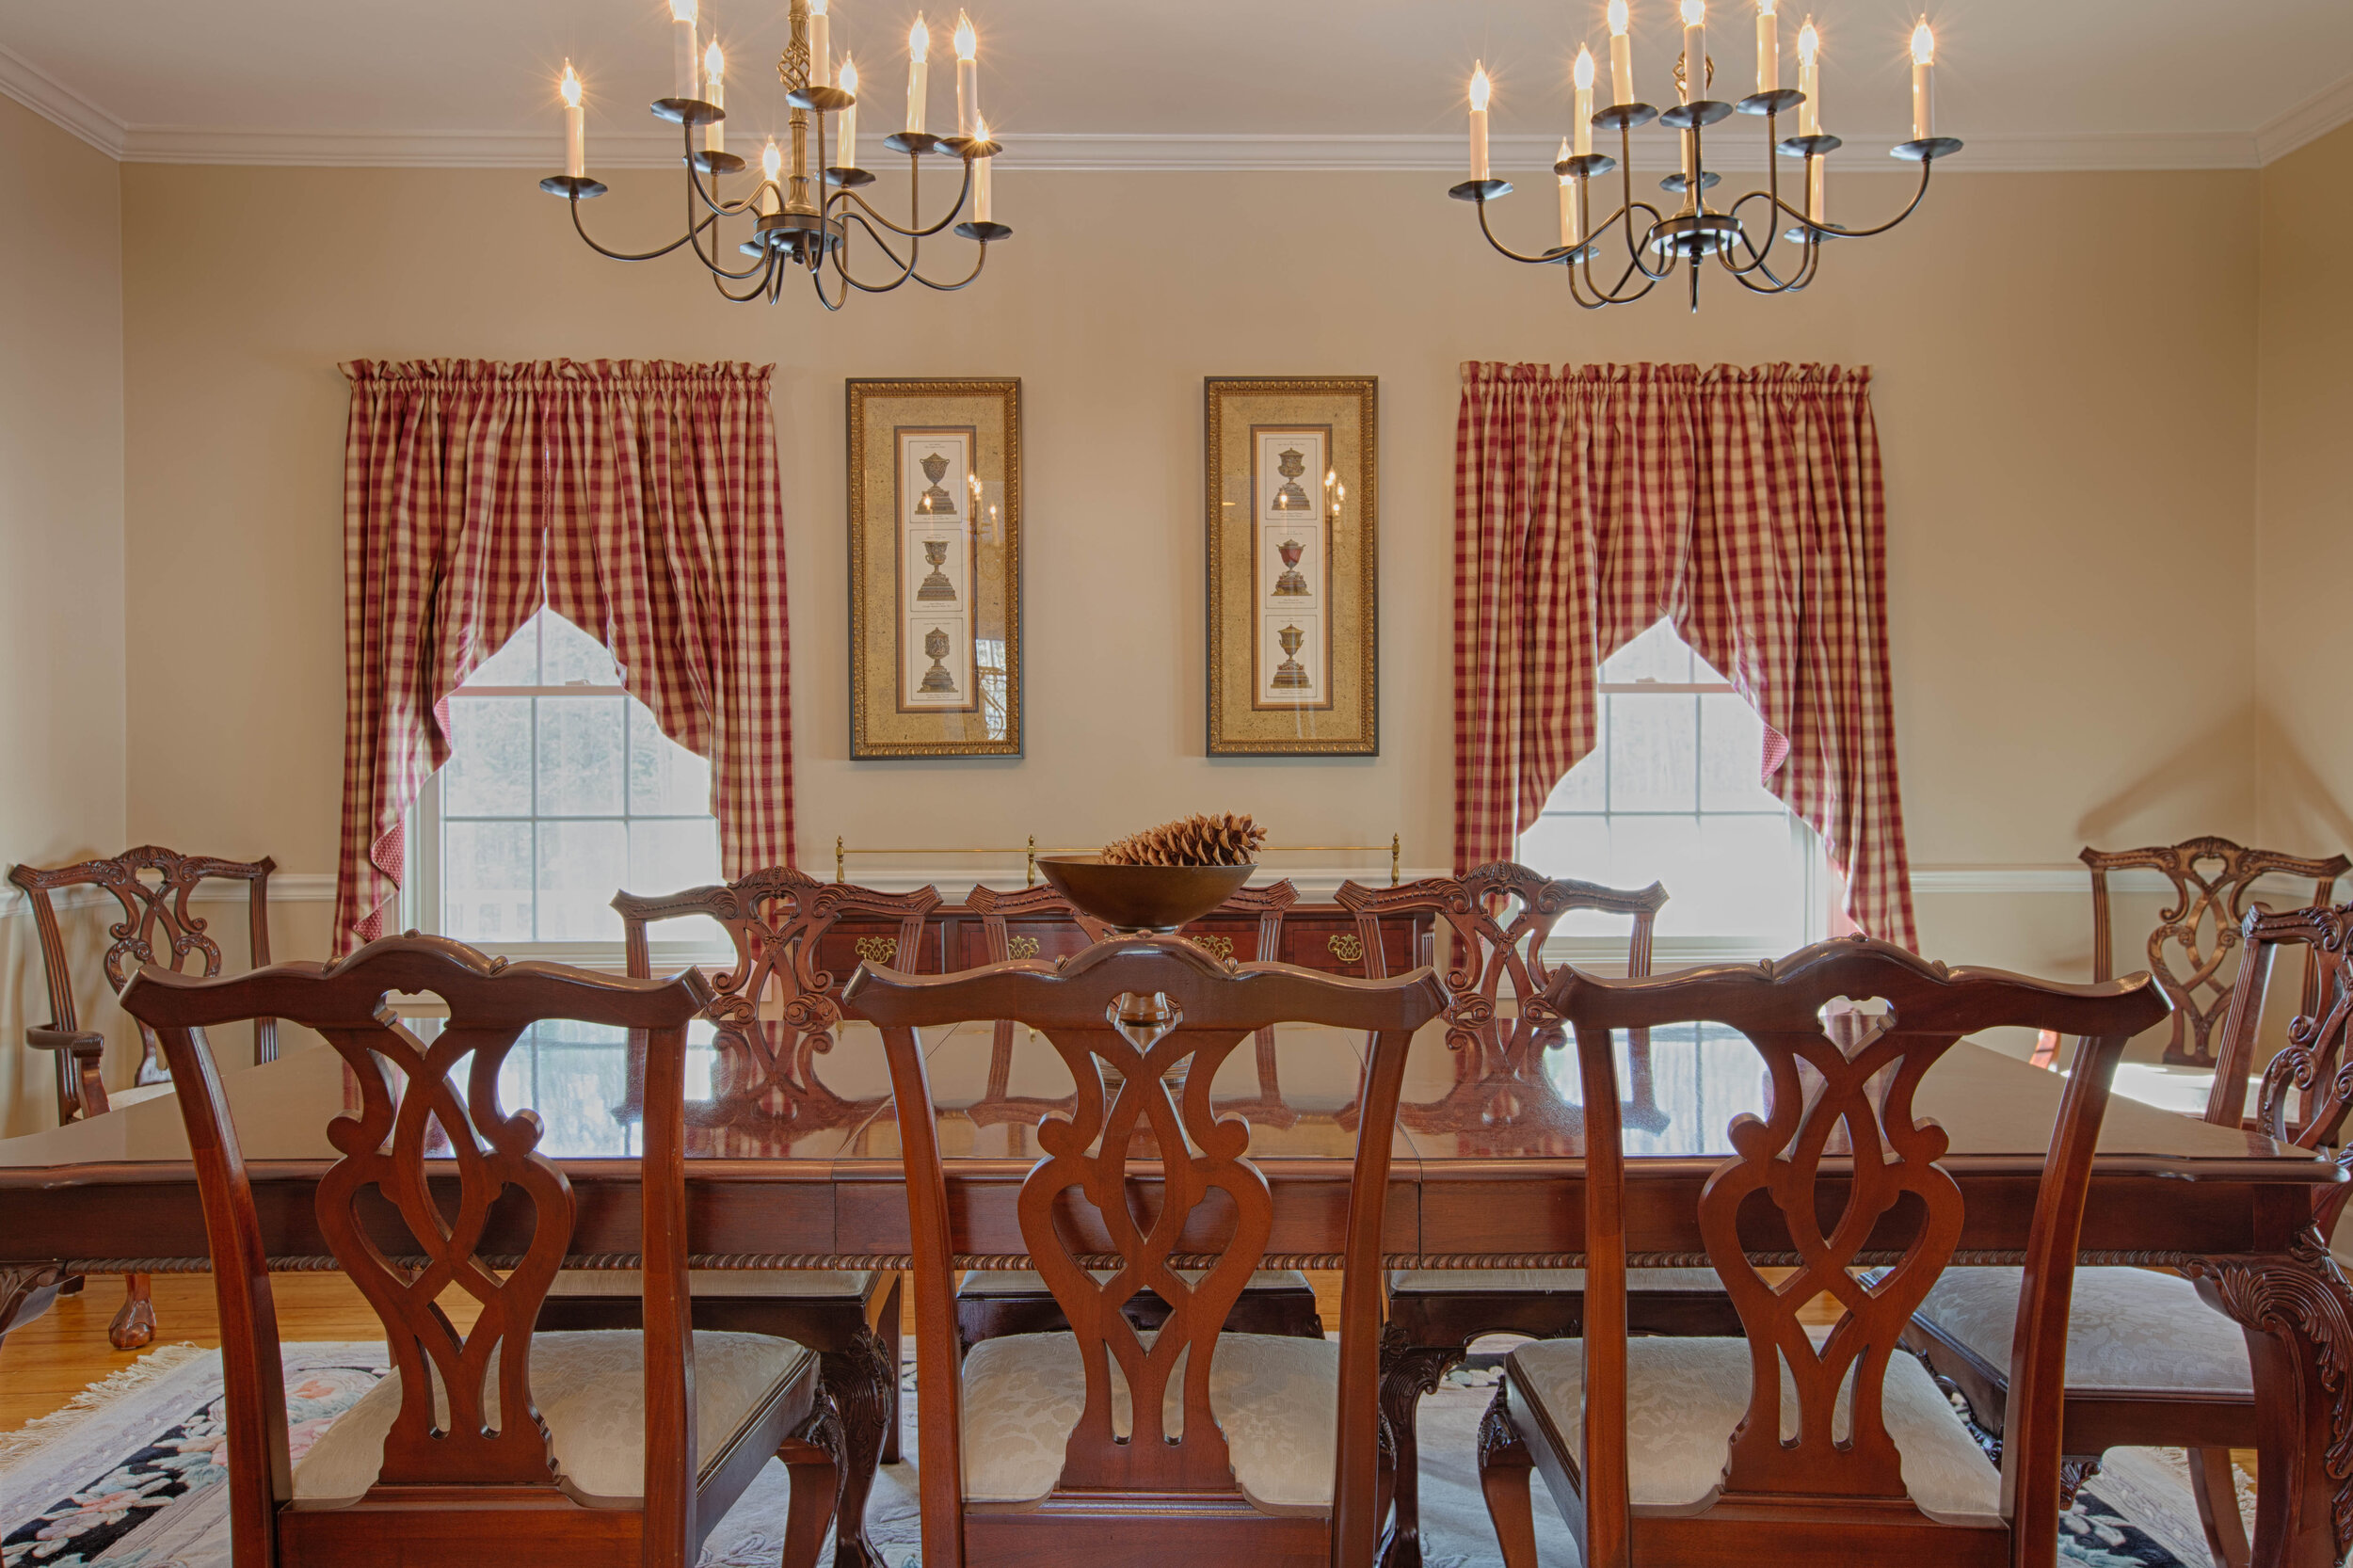  Dining room- focusing on the dining room table.  Window in the center of the wall with curtains hanging. 